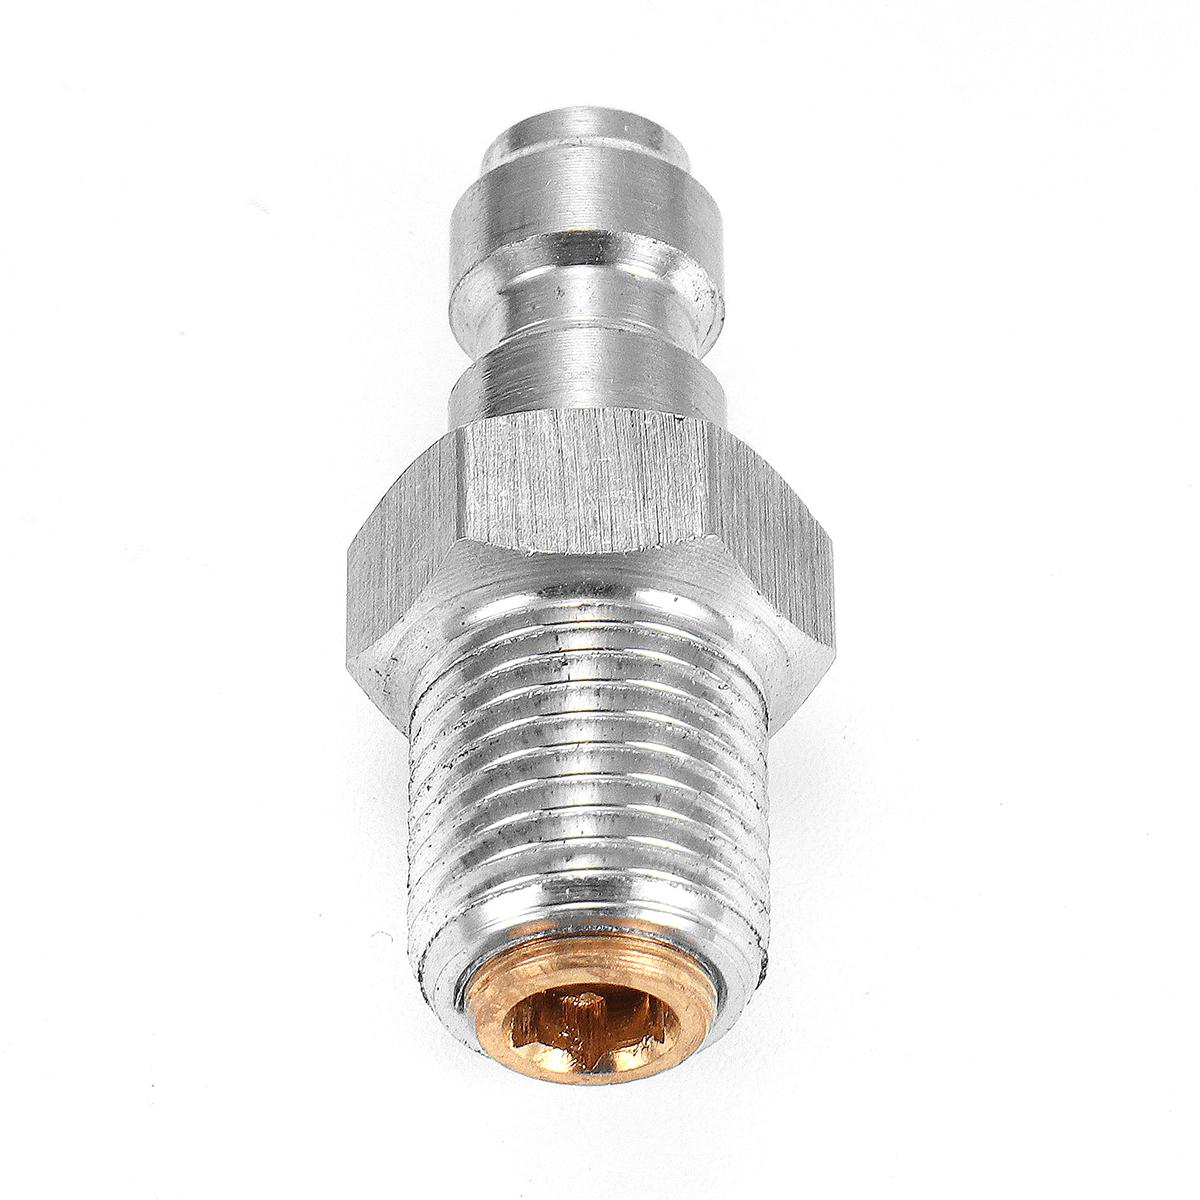 Paintball-PCP-Fill-Nipple-Adapter-Stainless-Steel-8mm-Thread-One-Way-Foster-Connector-18-BSPP-1320333